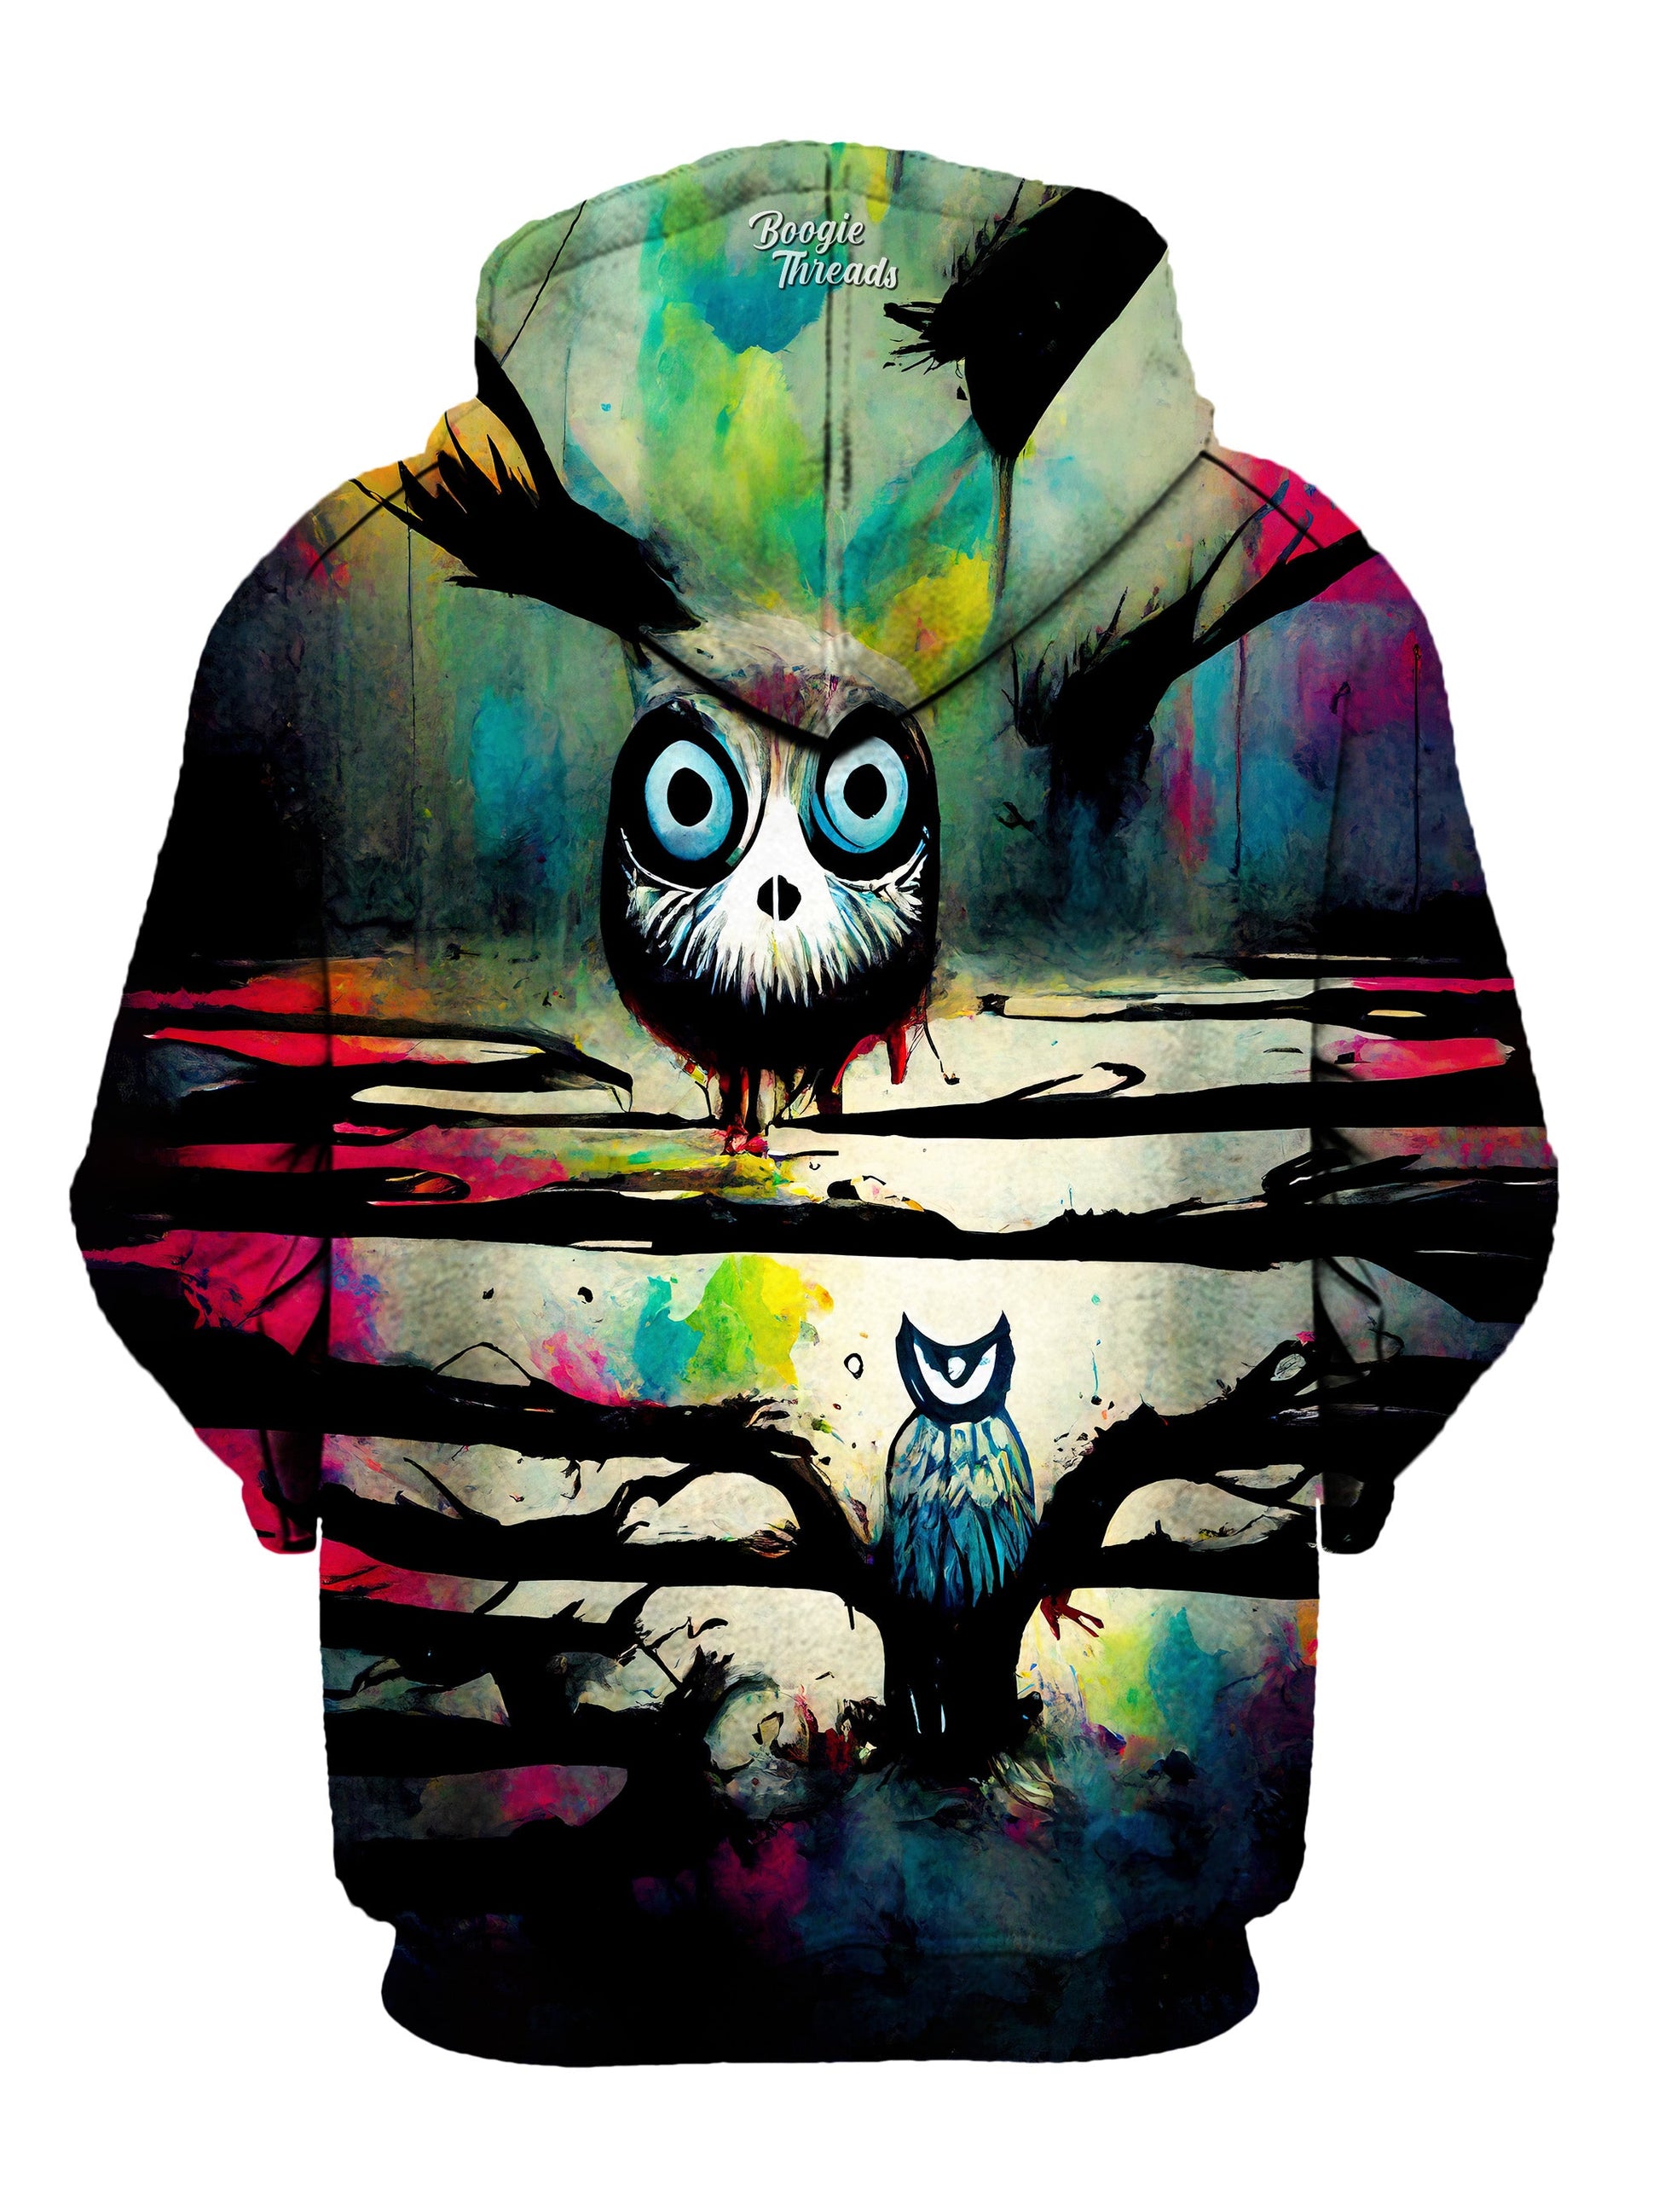 Unwritten Aftermath Unisex Pullover Hoodie - EDM Festival Clothing - Boogie Threads